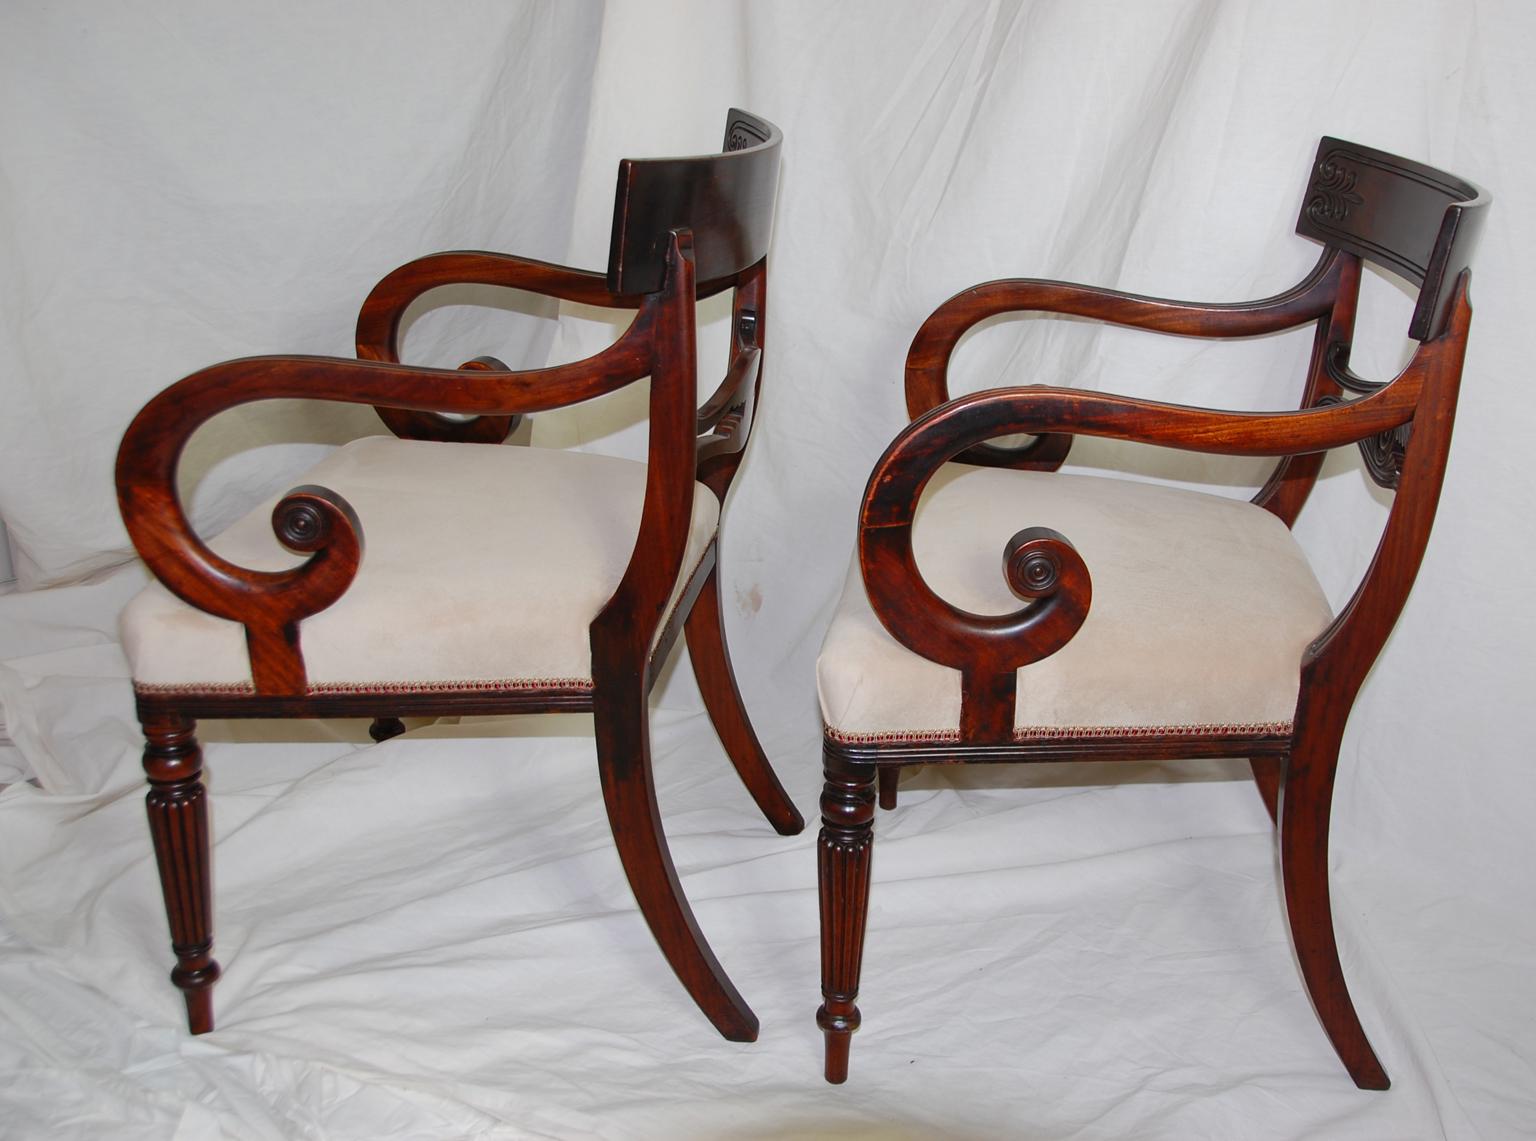 19th Century English Regency Period Pair of Mahogany Armchairs, Scroll Arms, Reeded Legs